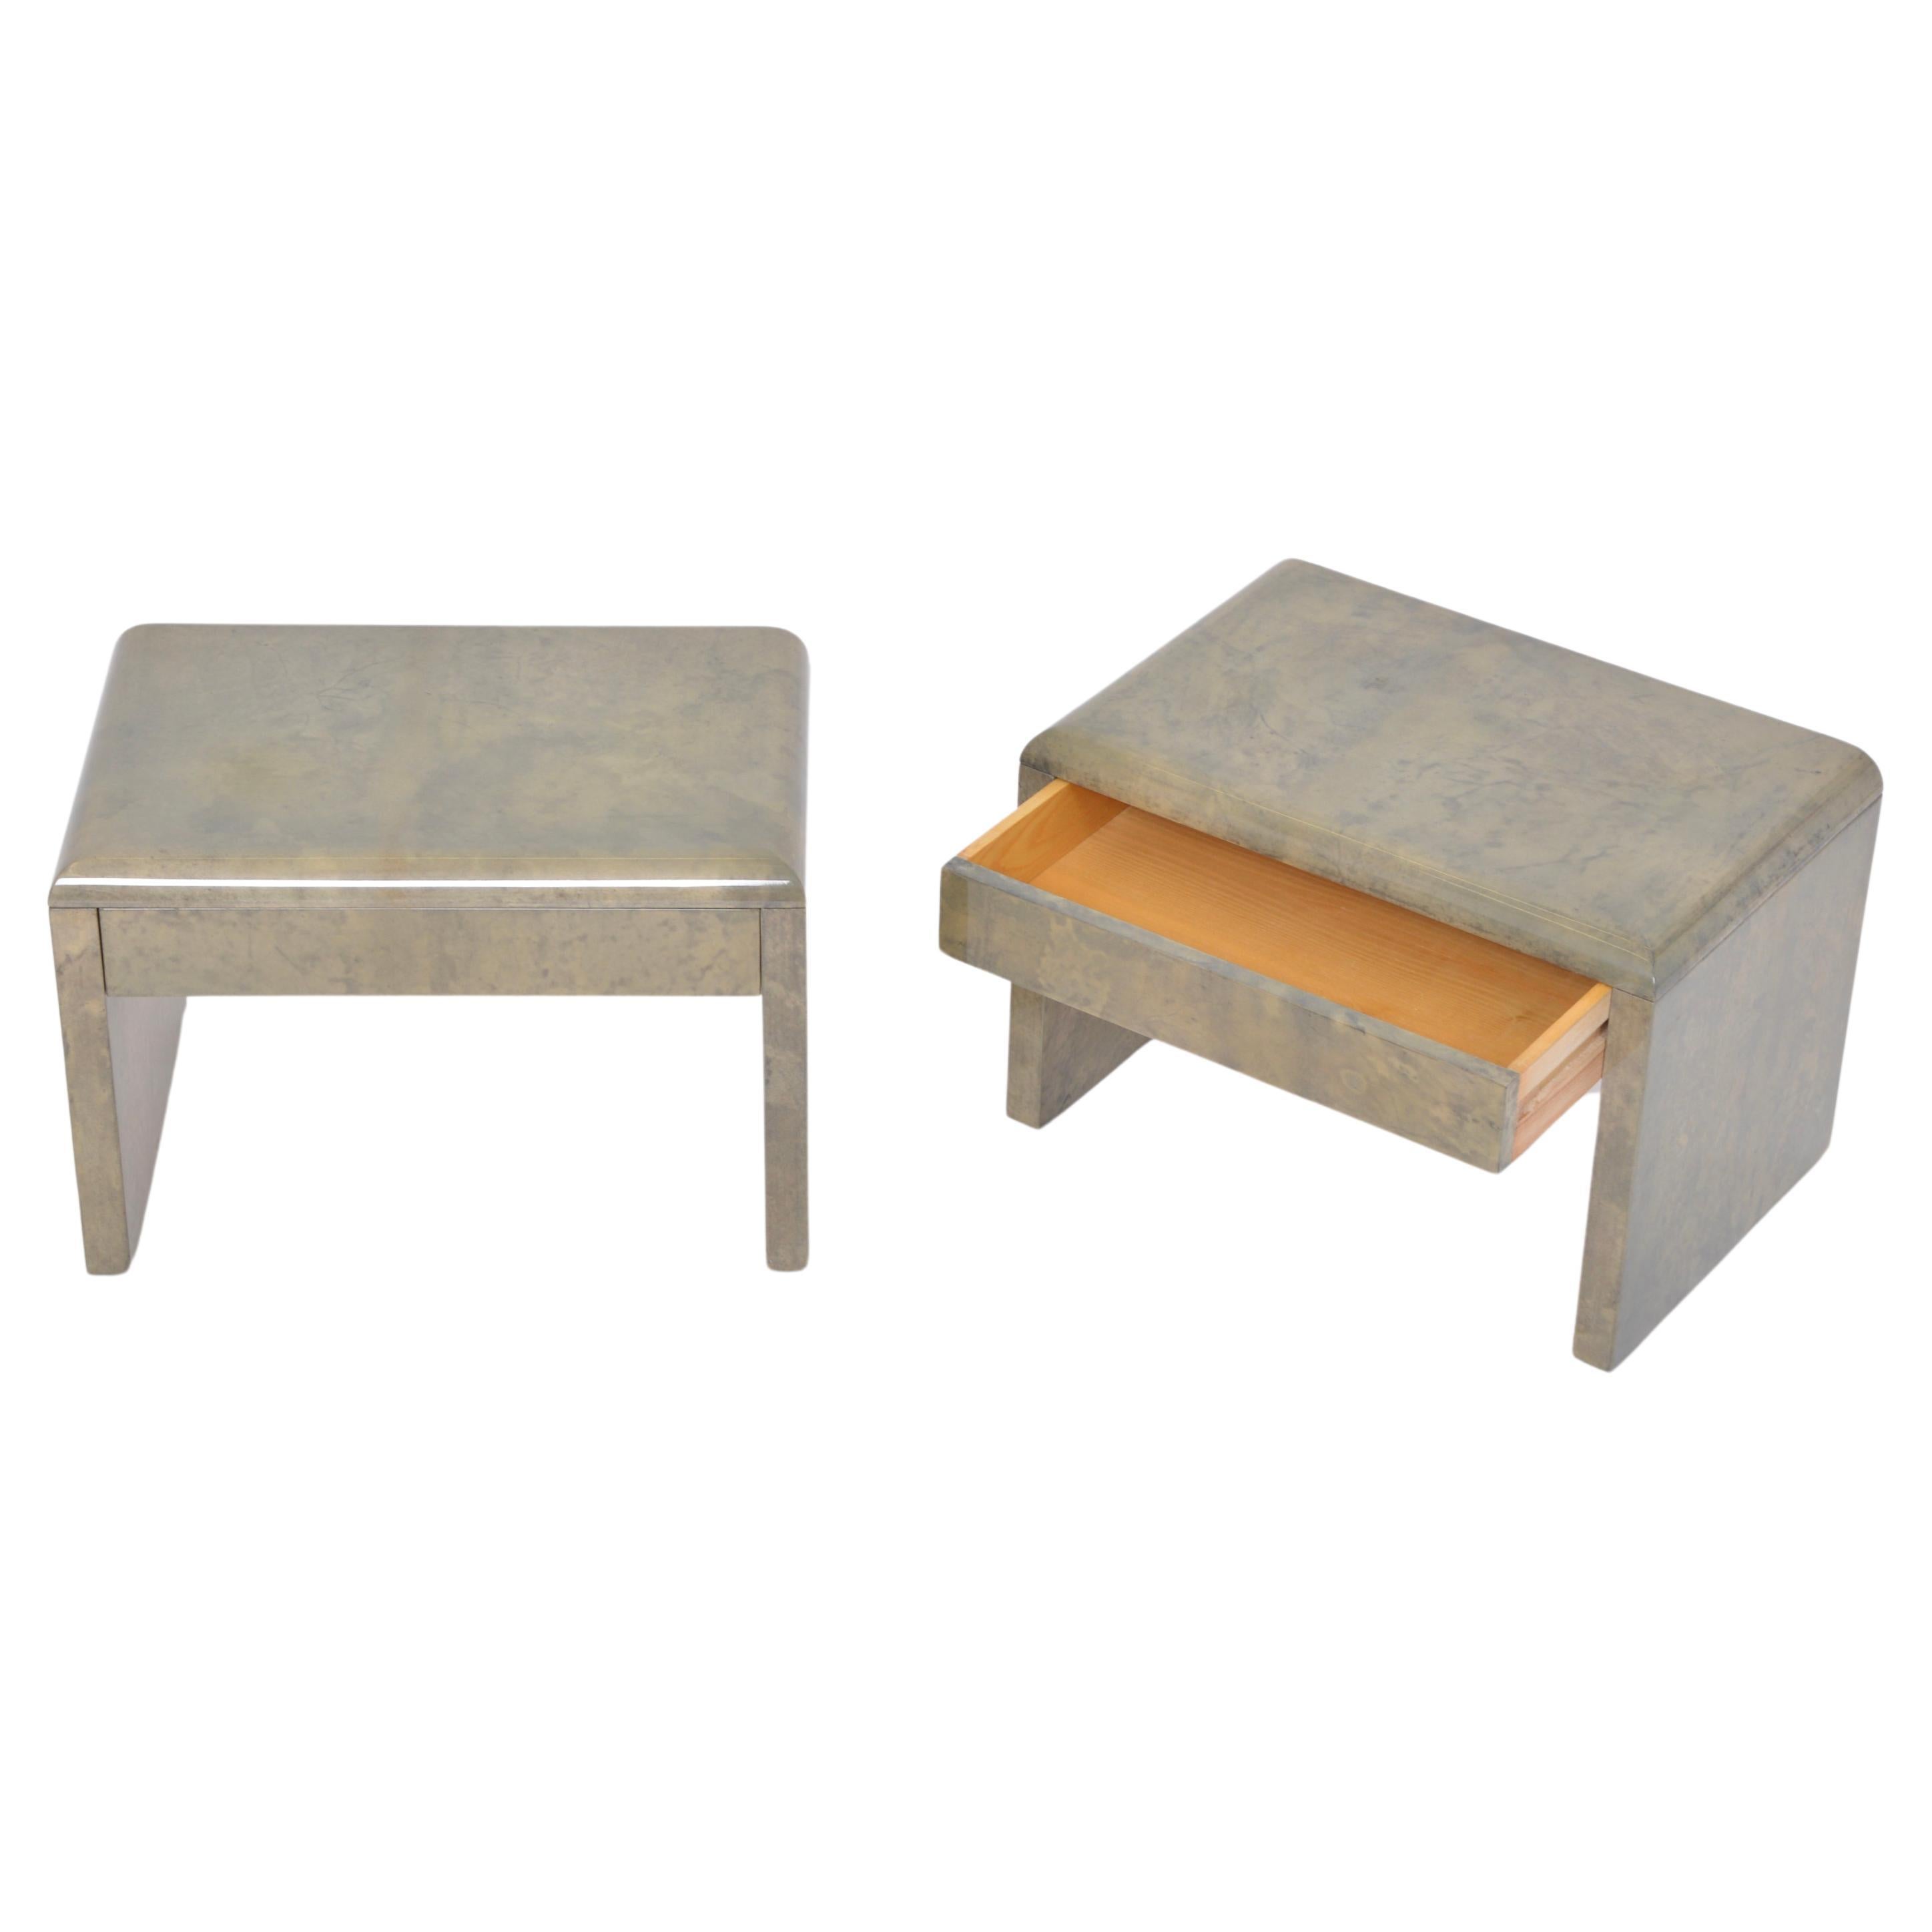 Mid-Century Modern Bedside Tables Made of Laquered Goat Skin by Aldo Tura